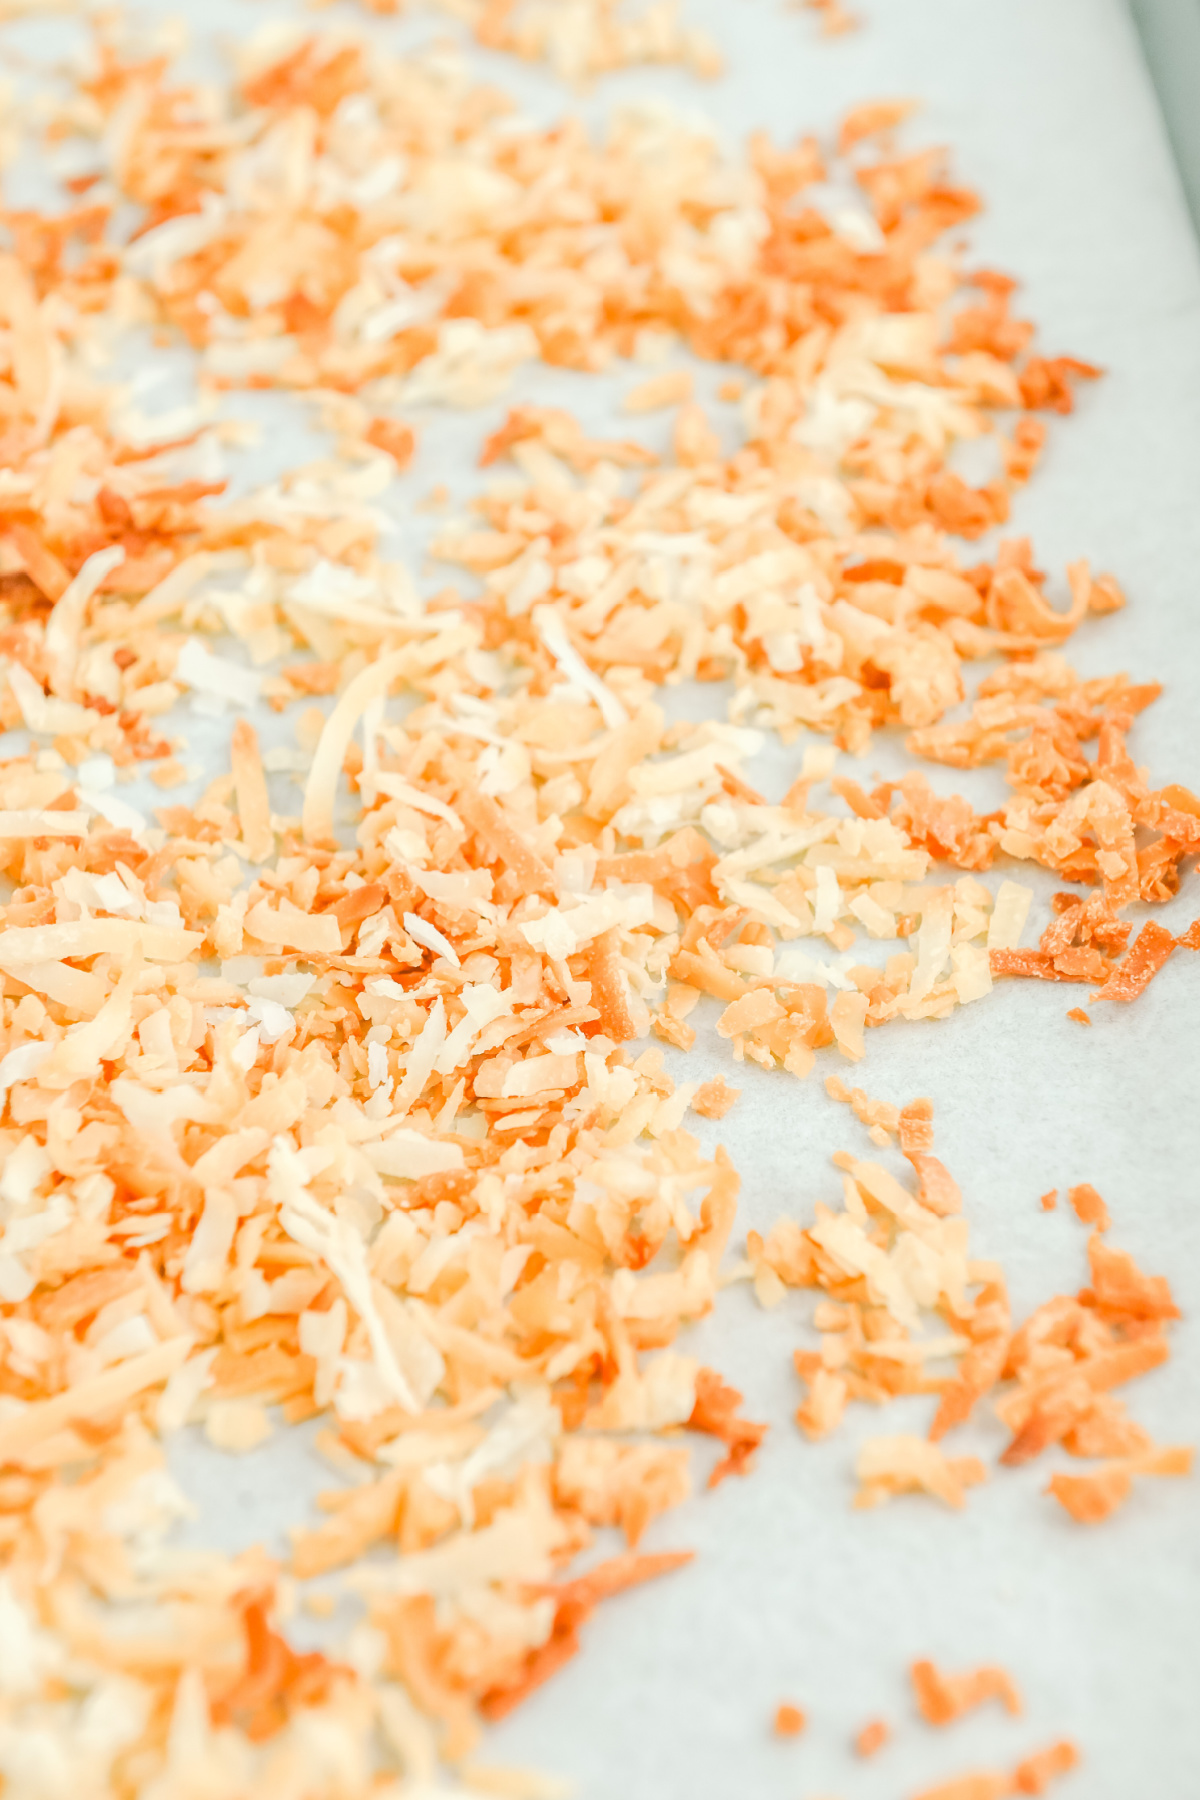 Toasted shredded coconut on parchment paper